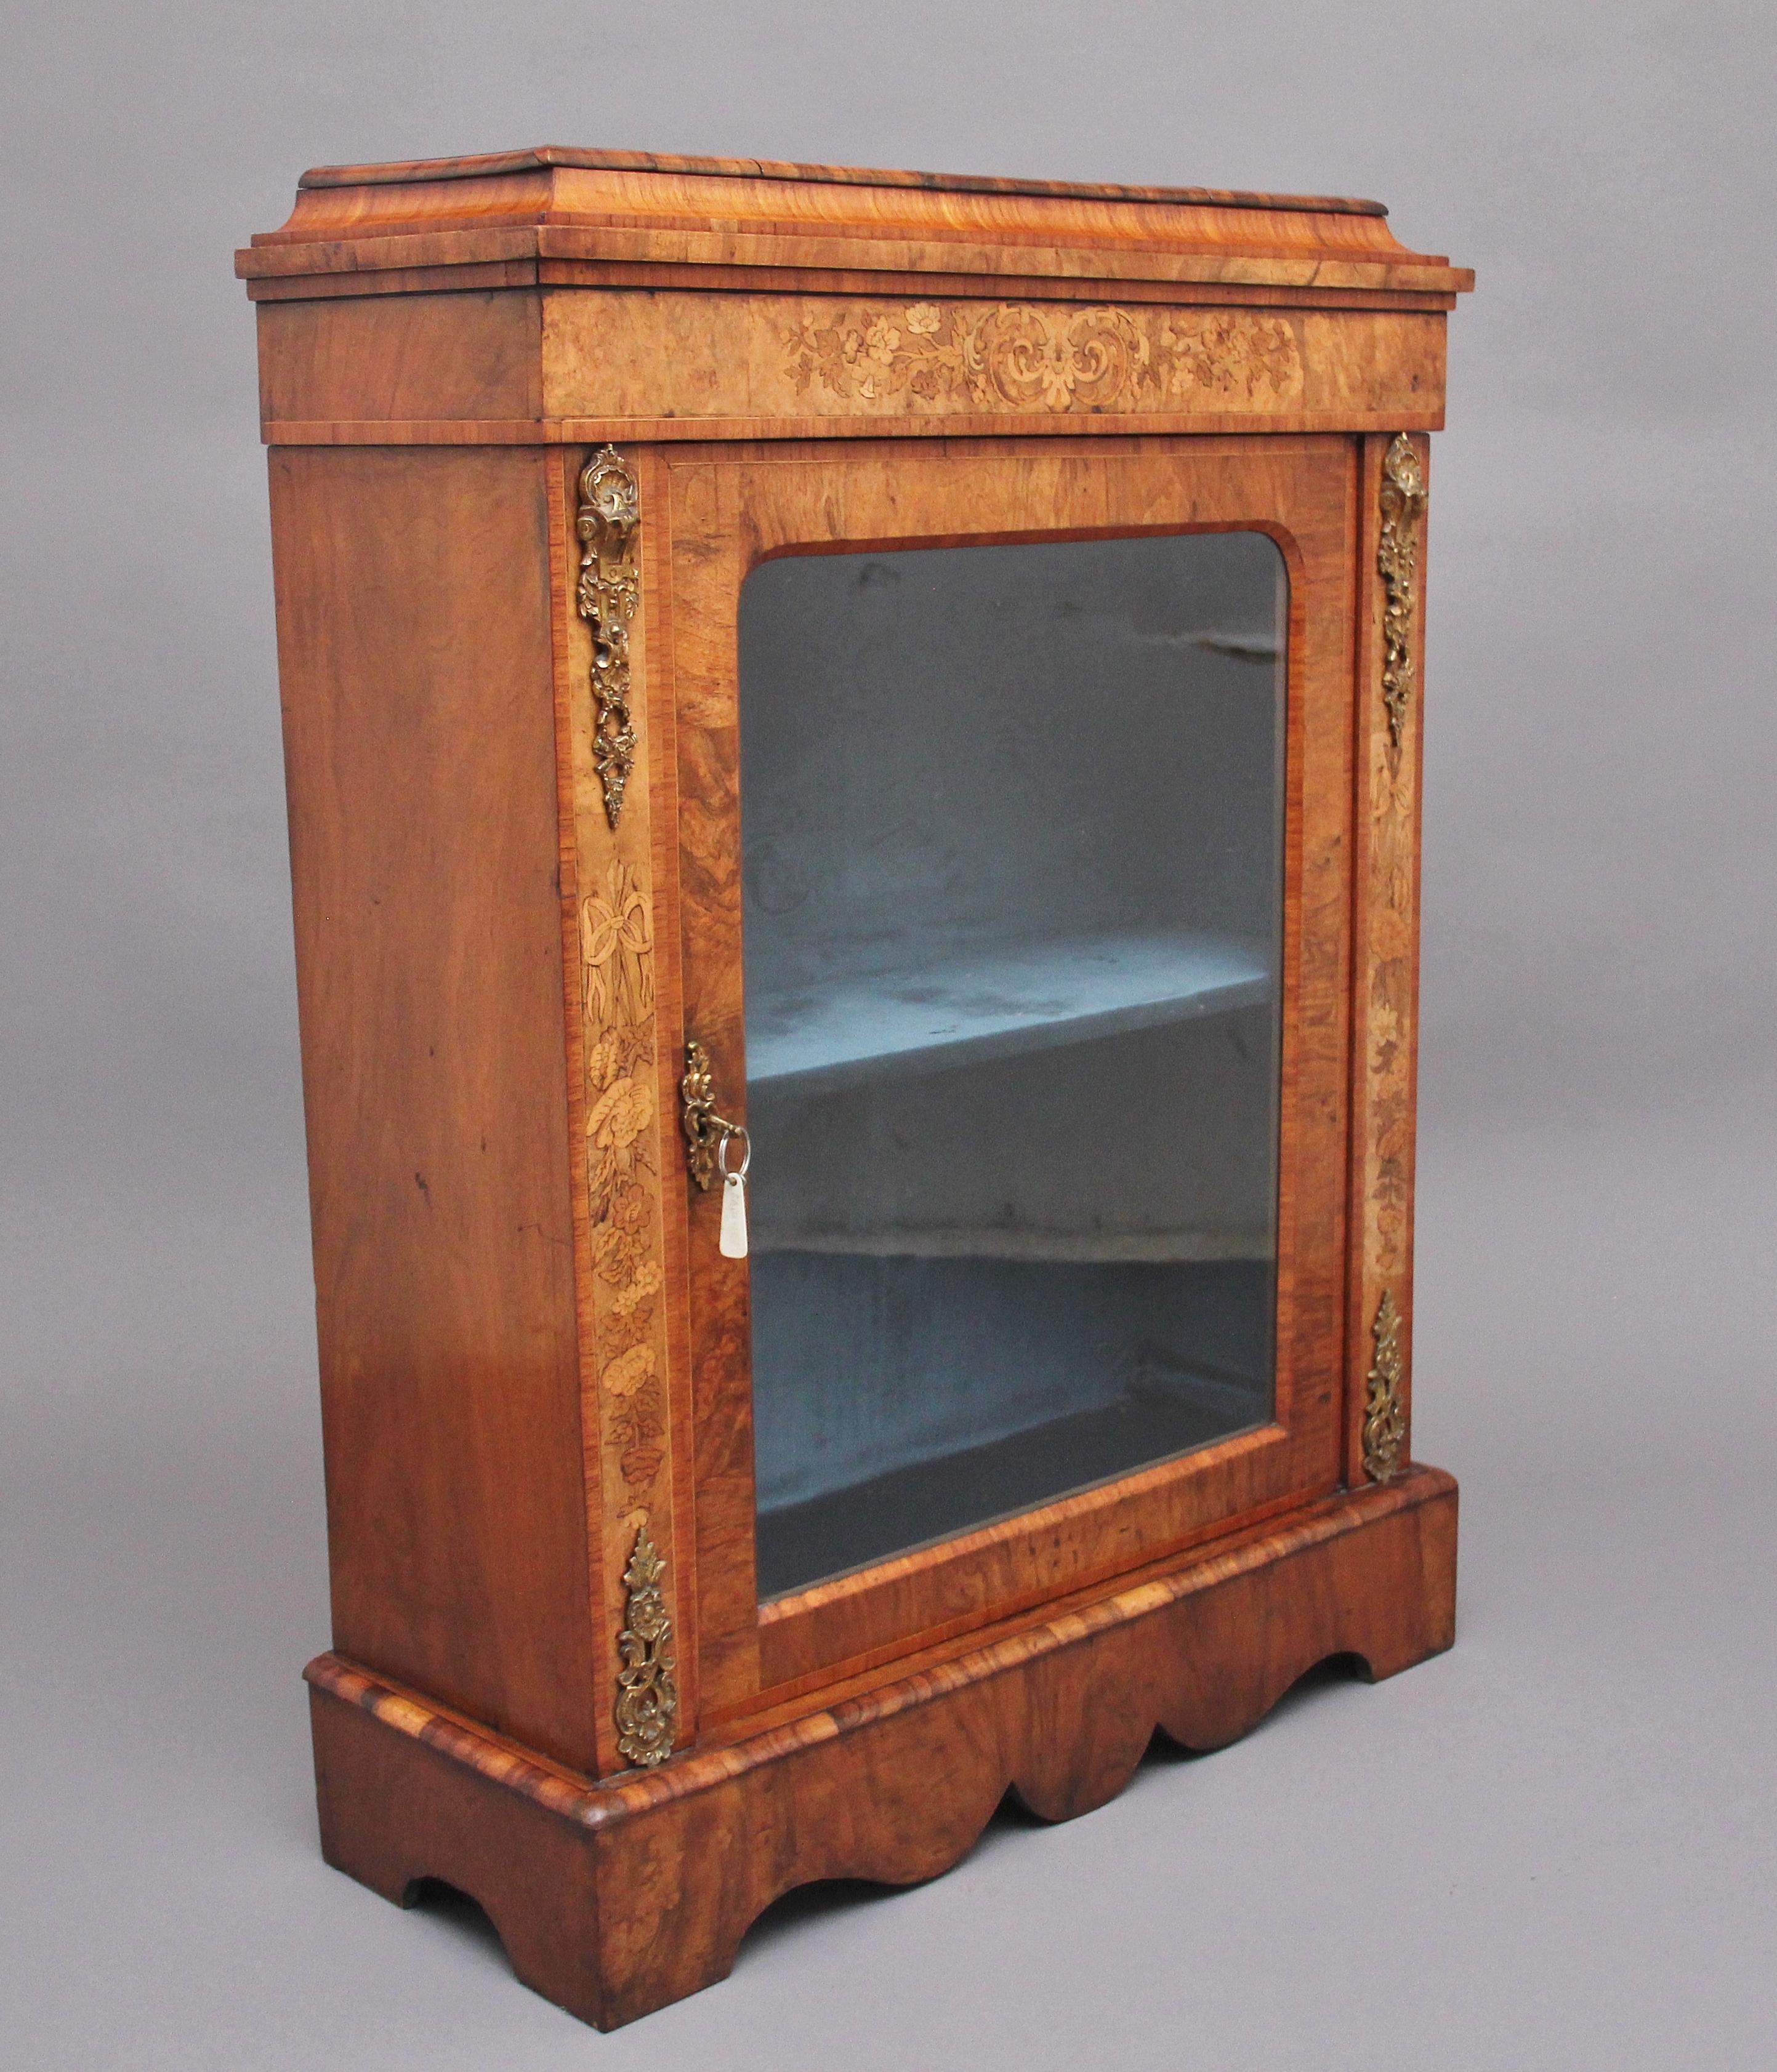 Early Victorian 19th Century Walnut and Marquetry Pier Cabinet